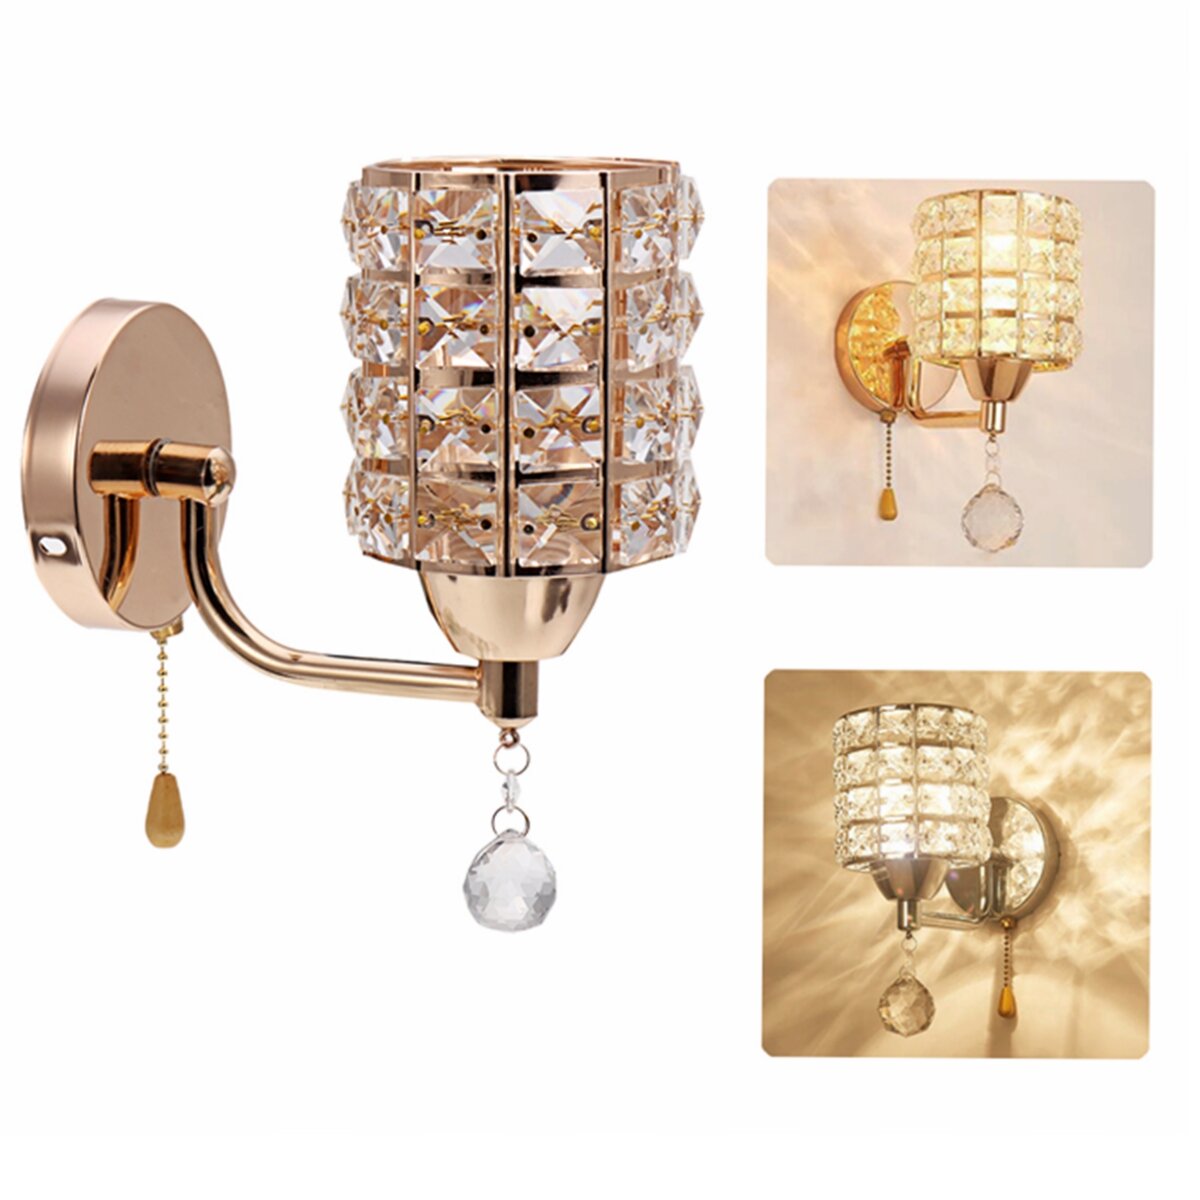 AC85-265V Luxury Crystal Wall Light Modern E27 Bedroom Aisle Sconce Lighting Lamp Fixtures Without B